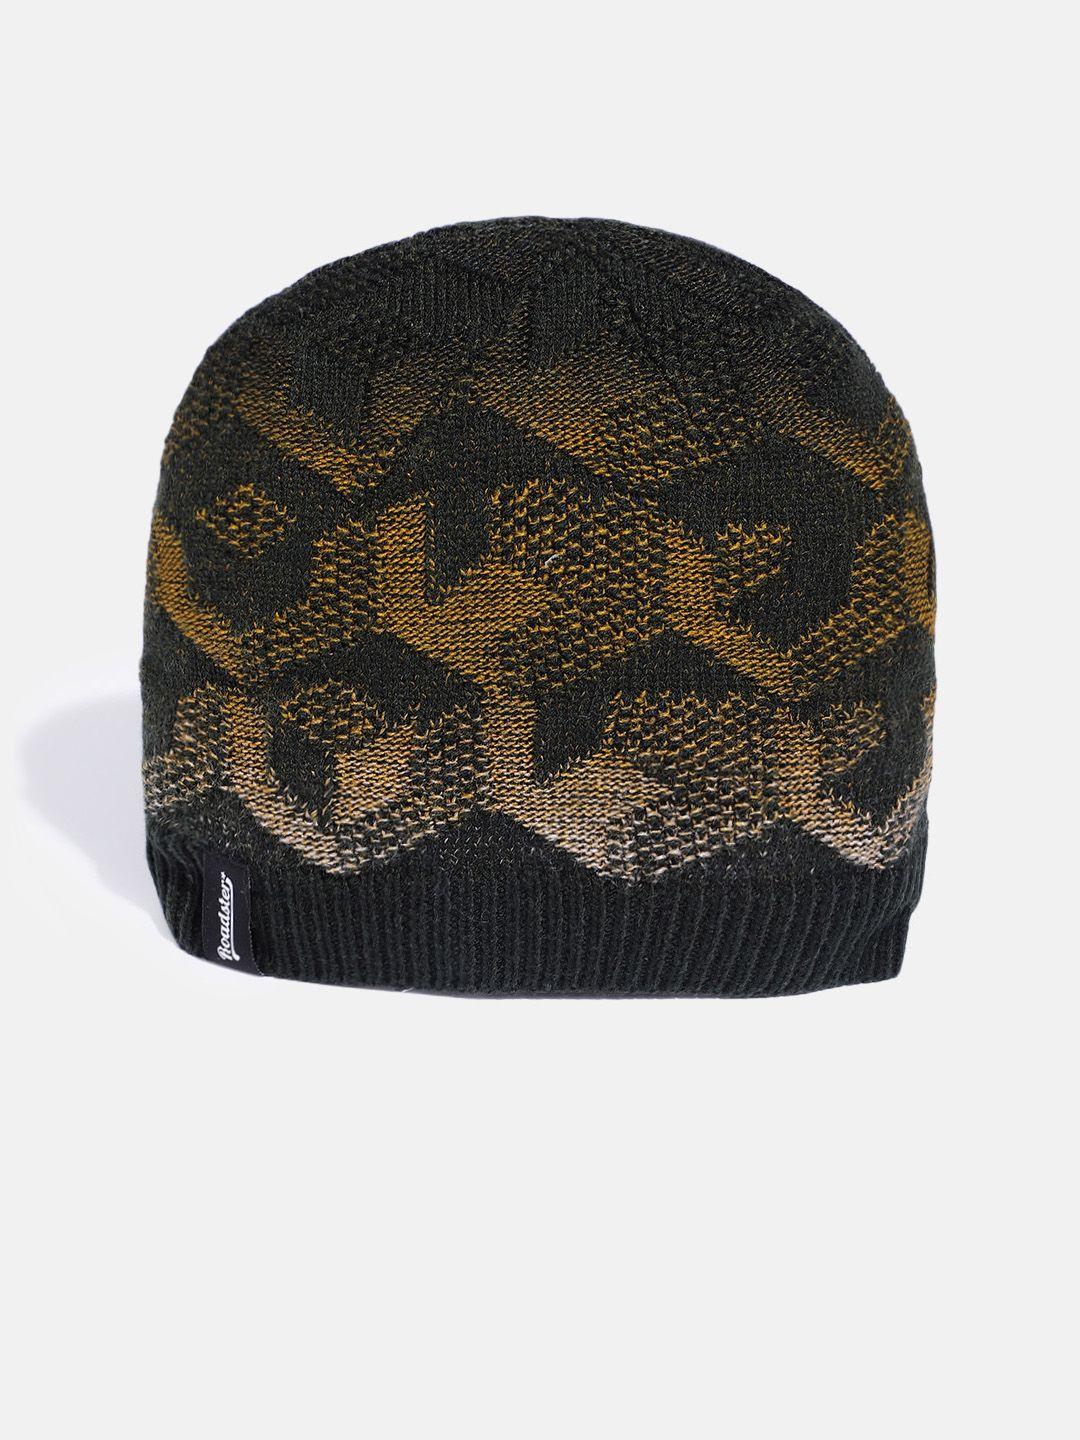 the roadster lifestyle co unisex green & yellow self design beanie